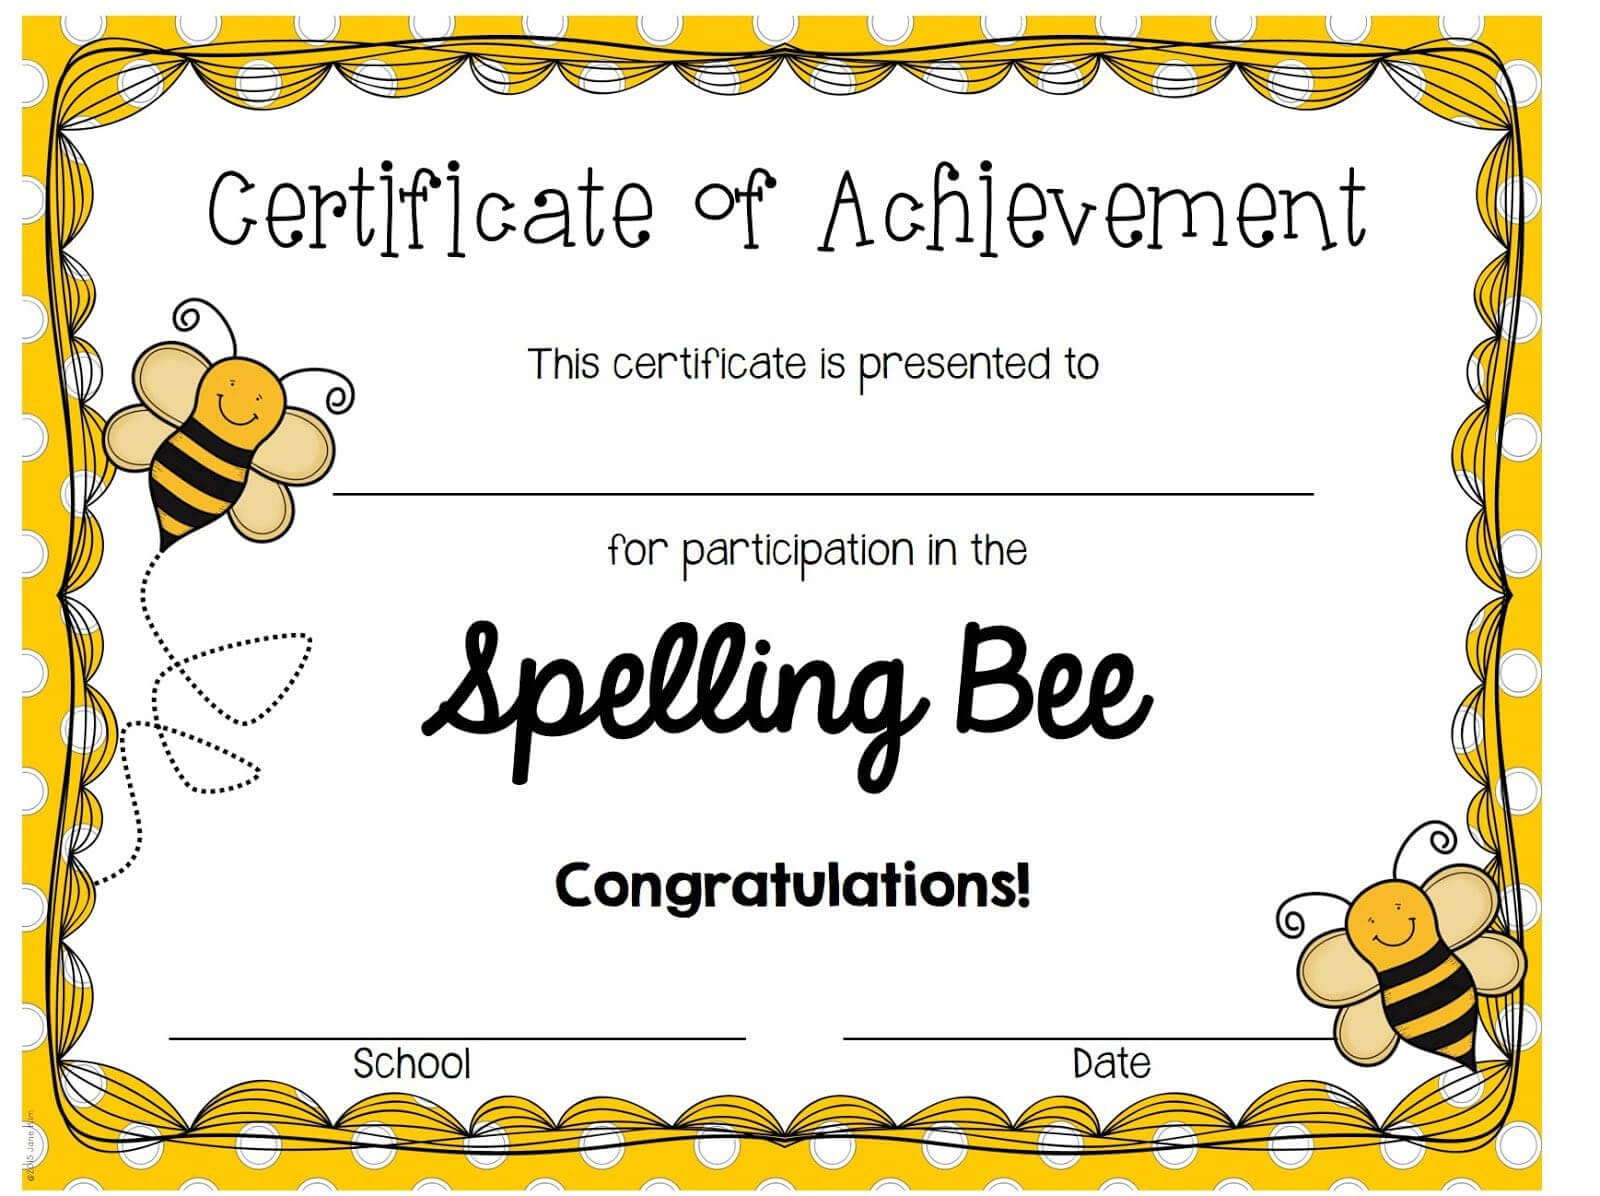 Spelling Bee Invitations Template For Spelling Bee Award Certificate Template